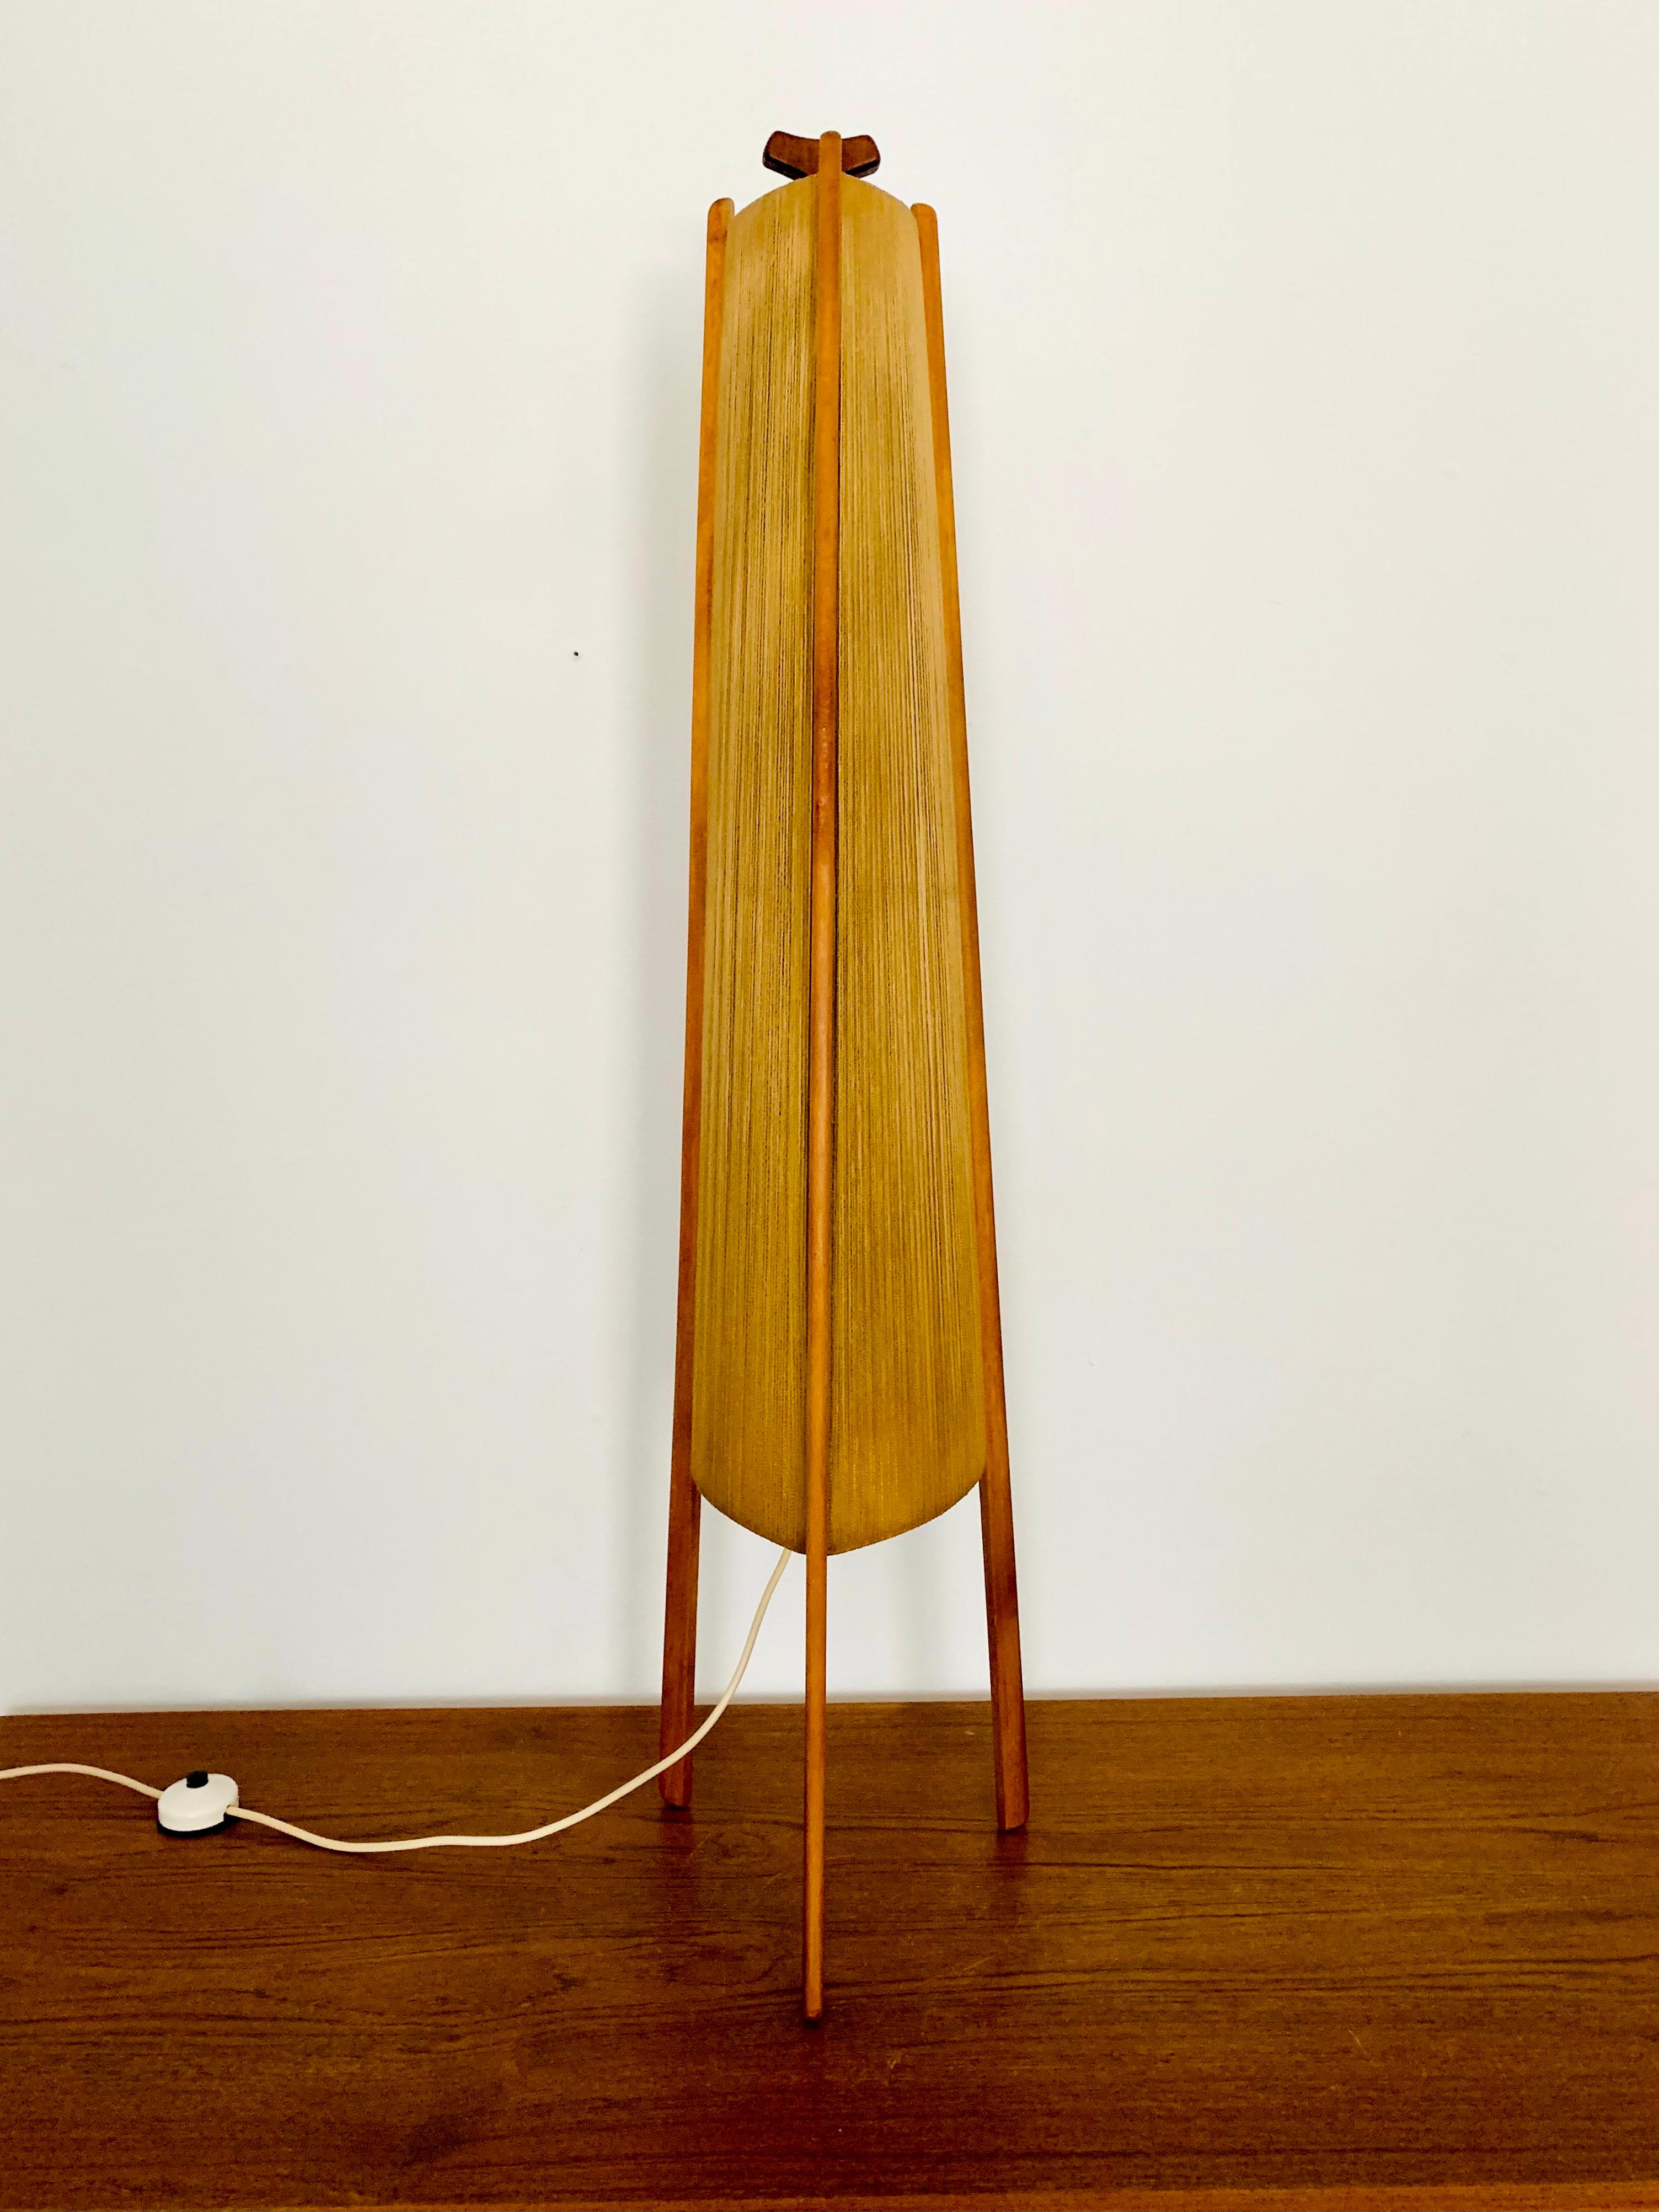 Exceptionally beautiful and very rare floor lamp from the 1960s.
The design was very unusual.
The shape and the materials create a warm and very pleasant light.

Condition:

Very good vintage condition with slight signs of wear.
The Sisal lampshade